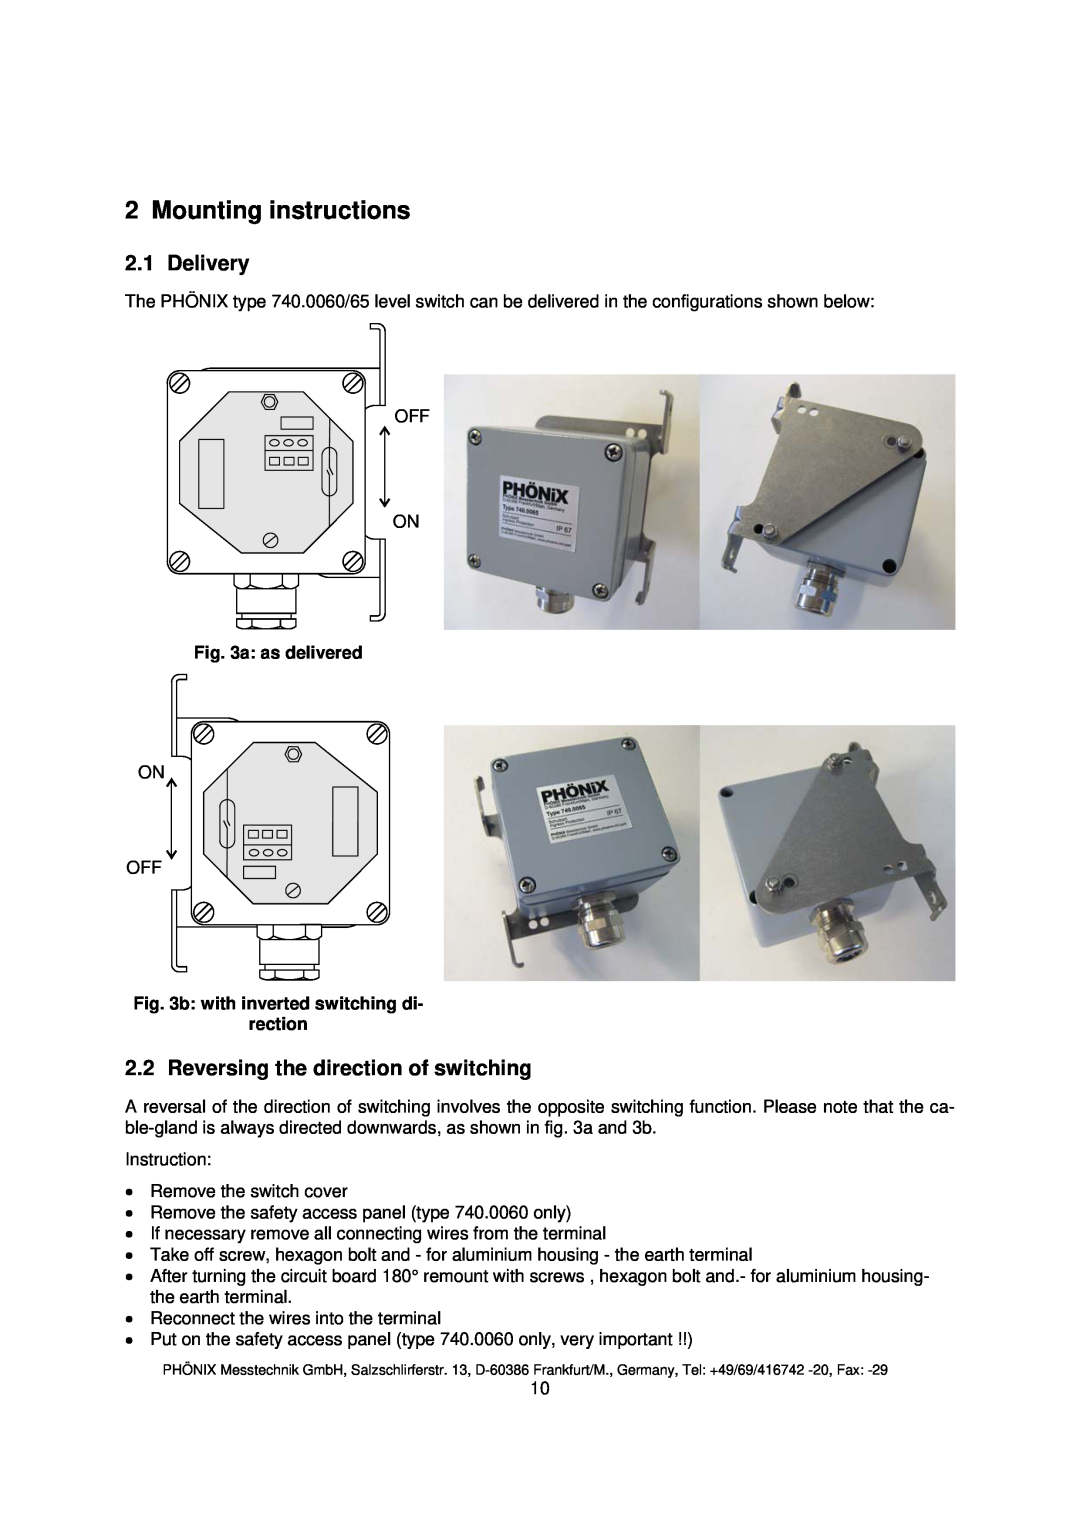 Euphonix 740.0065NA Mounting instructions, Delivery, Reversing the direction of switching, a as delivered 